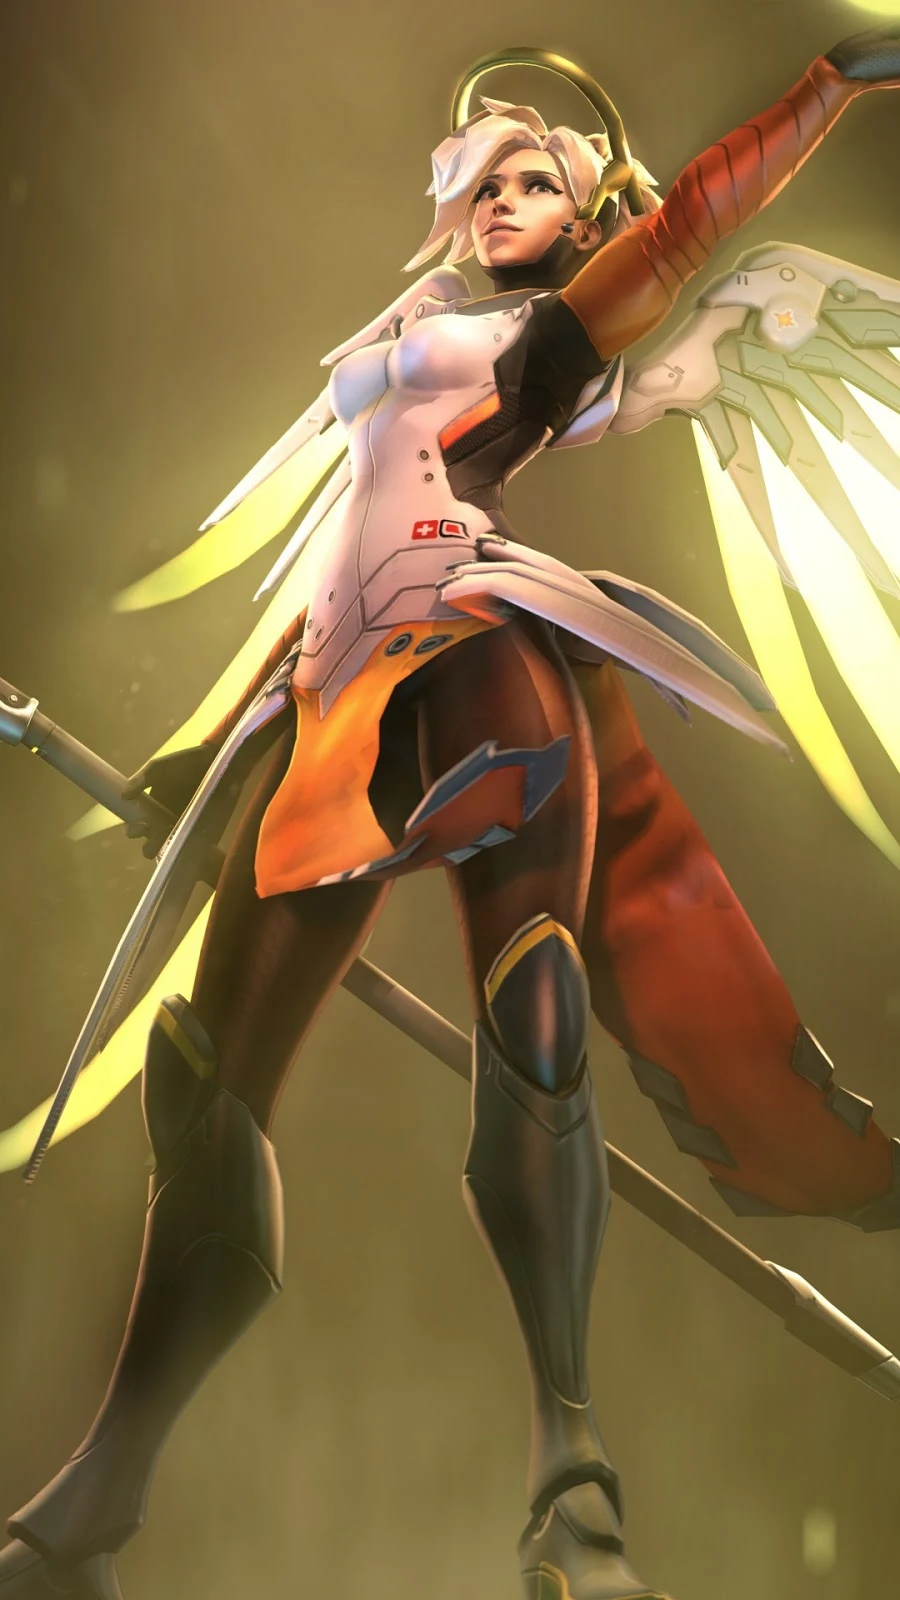 Papel de parede grátis Mercy Guardian Angel Overwatch para PC, Notebook, iPhone, Android e Tablet.